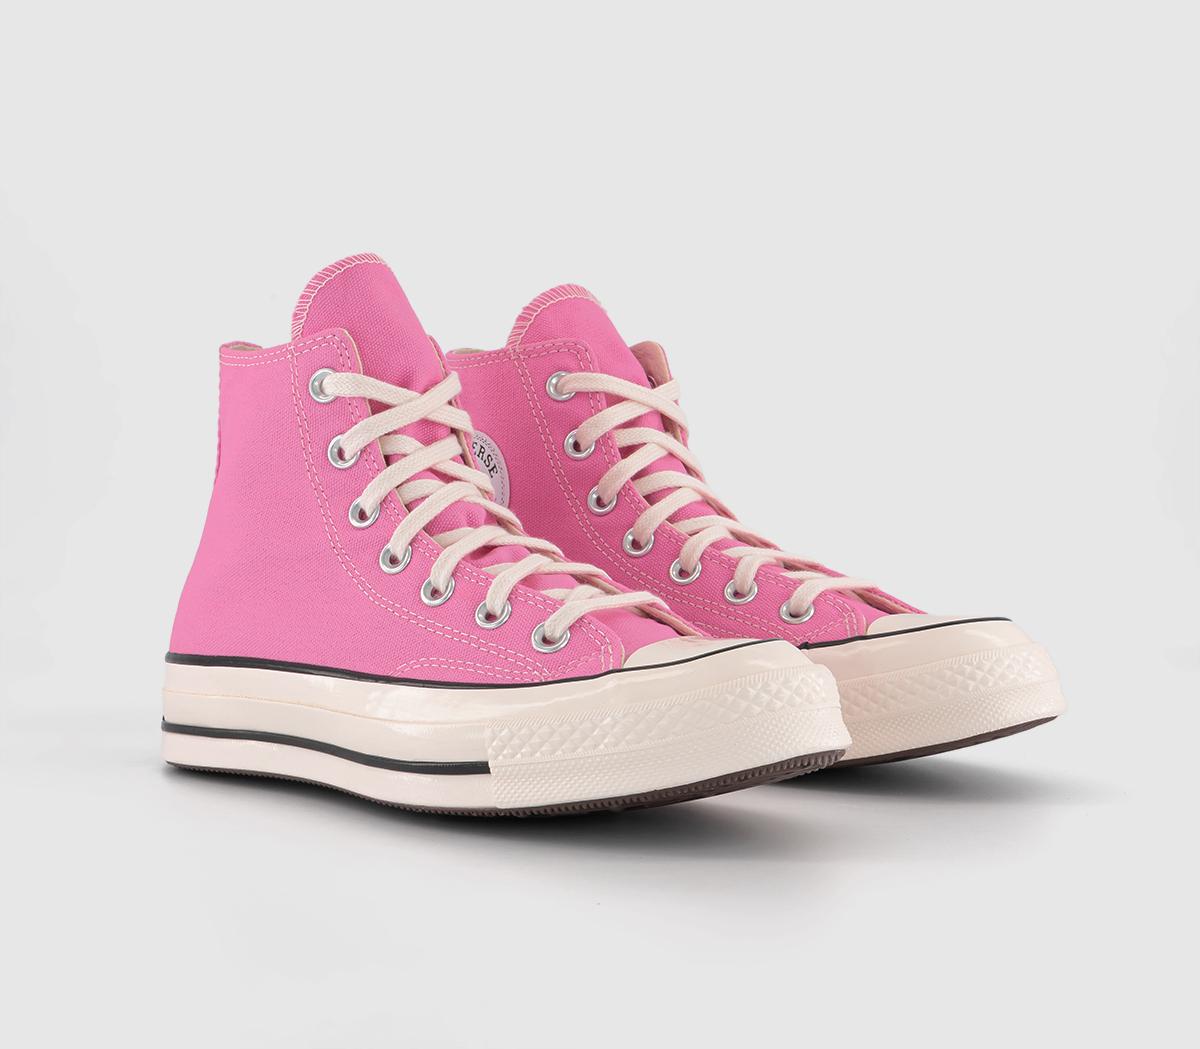 Converse All Star Hi 70 S Trainers Pink Egret Black - Women's Trainers